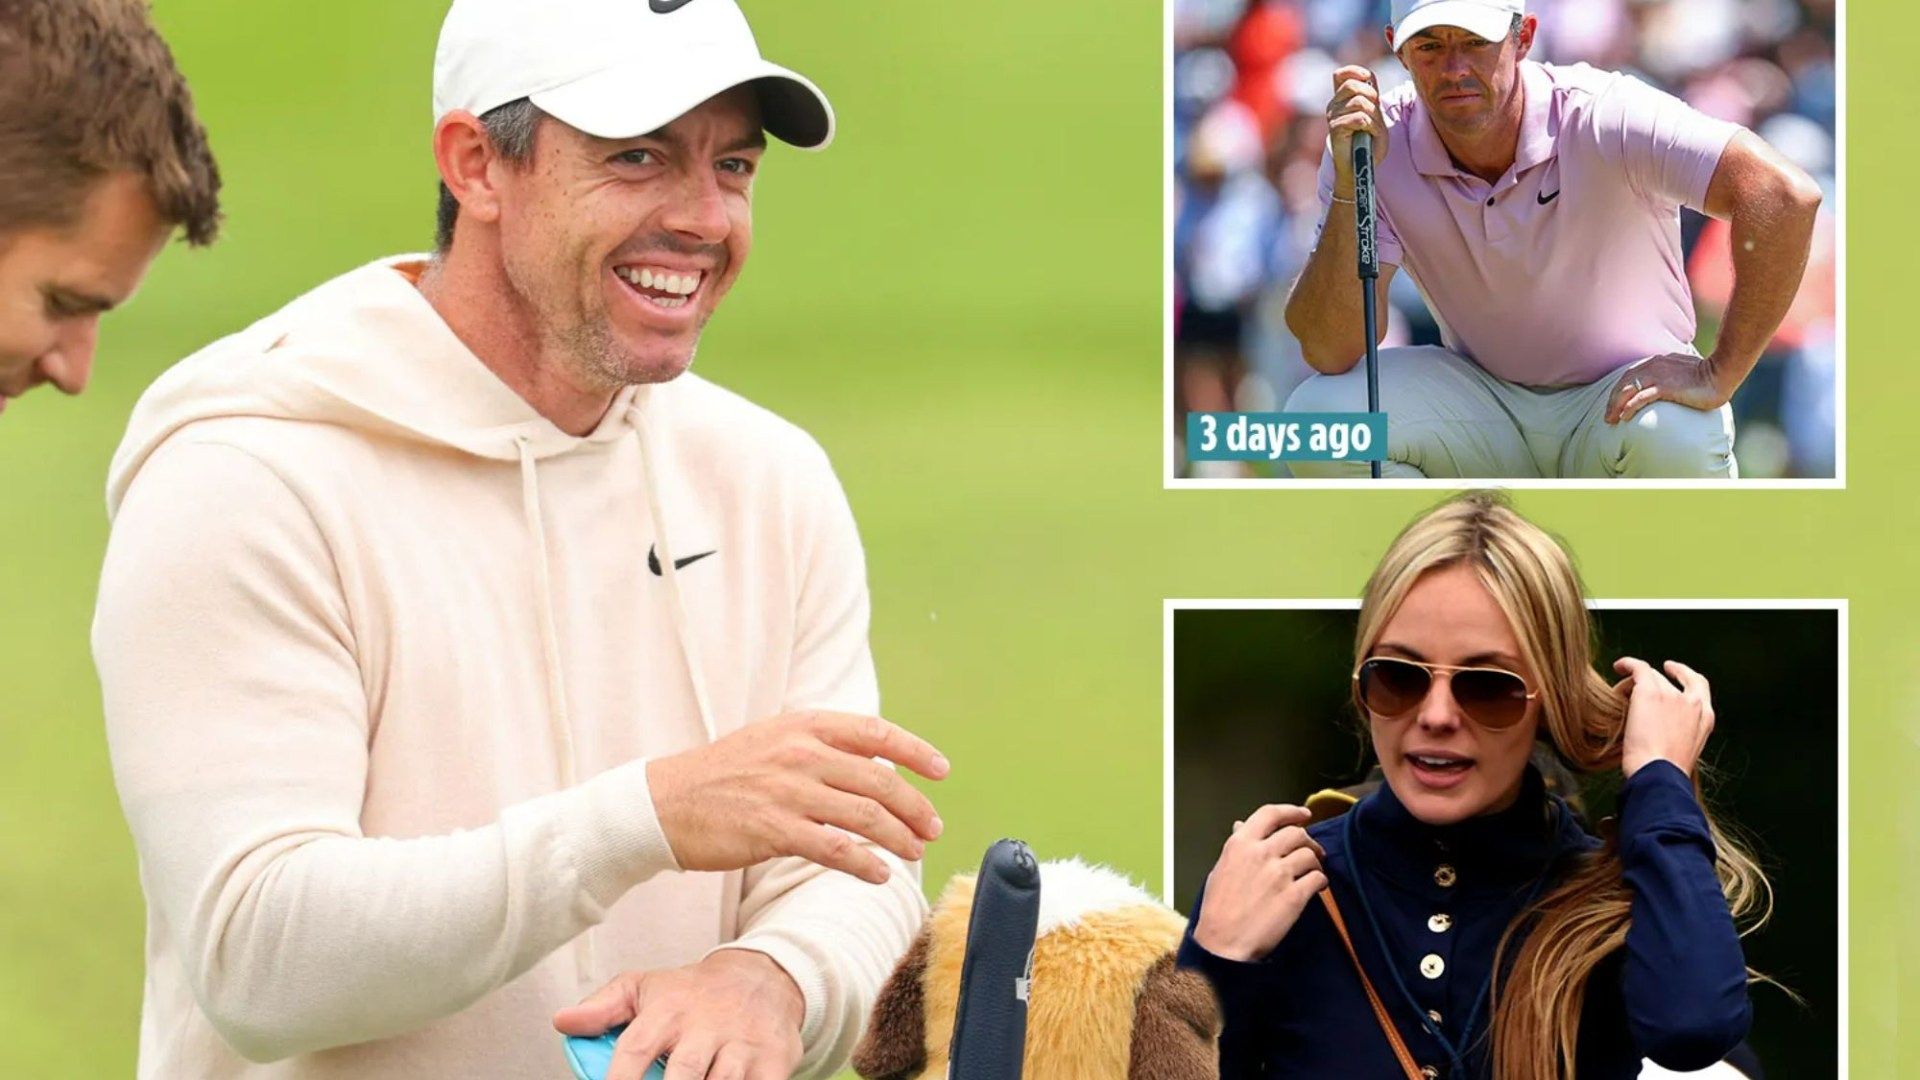 Rory McIlroy seen without wedding ring for first time hours after news of shock divorce from wife Erica Stoll [Video]